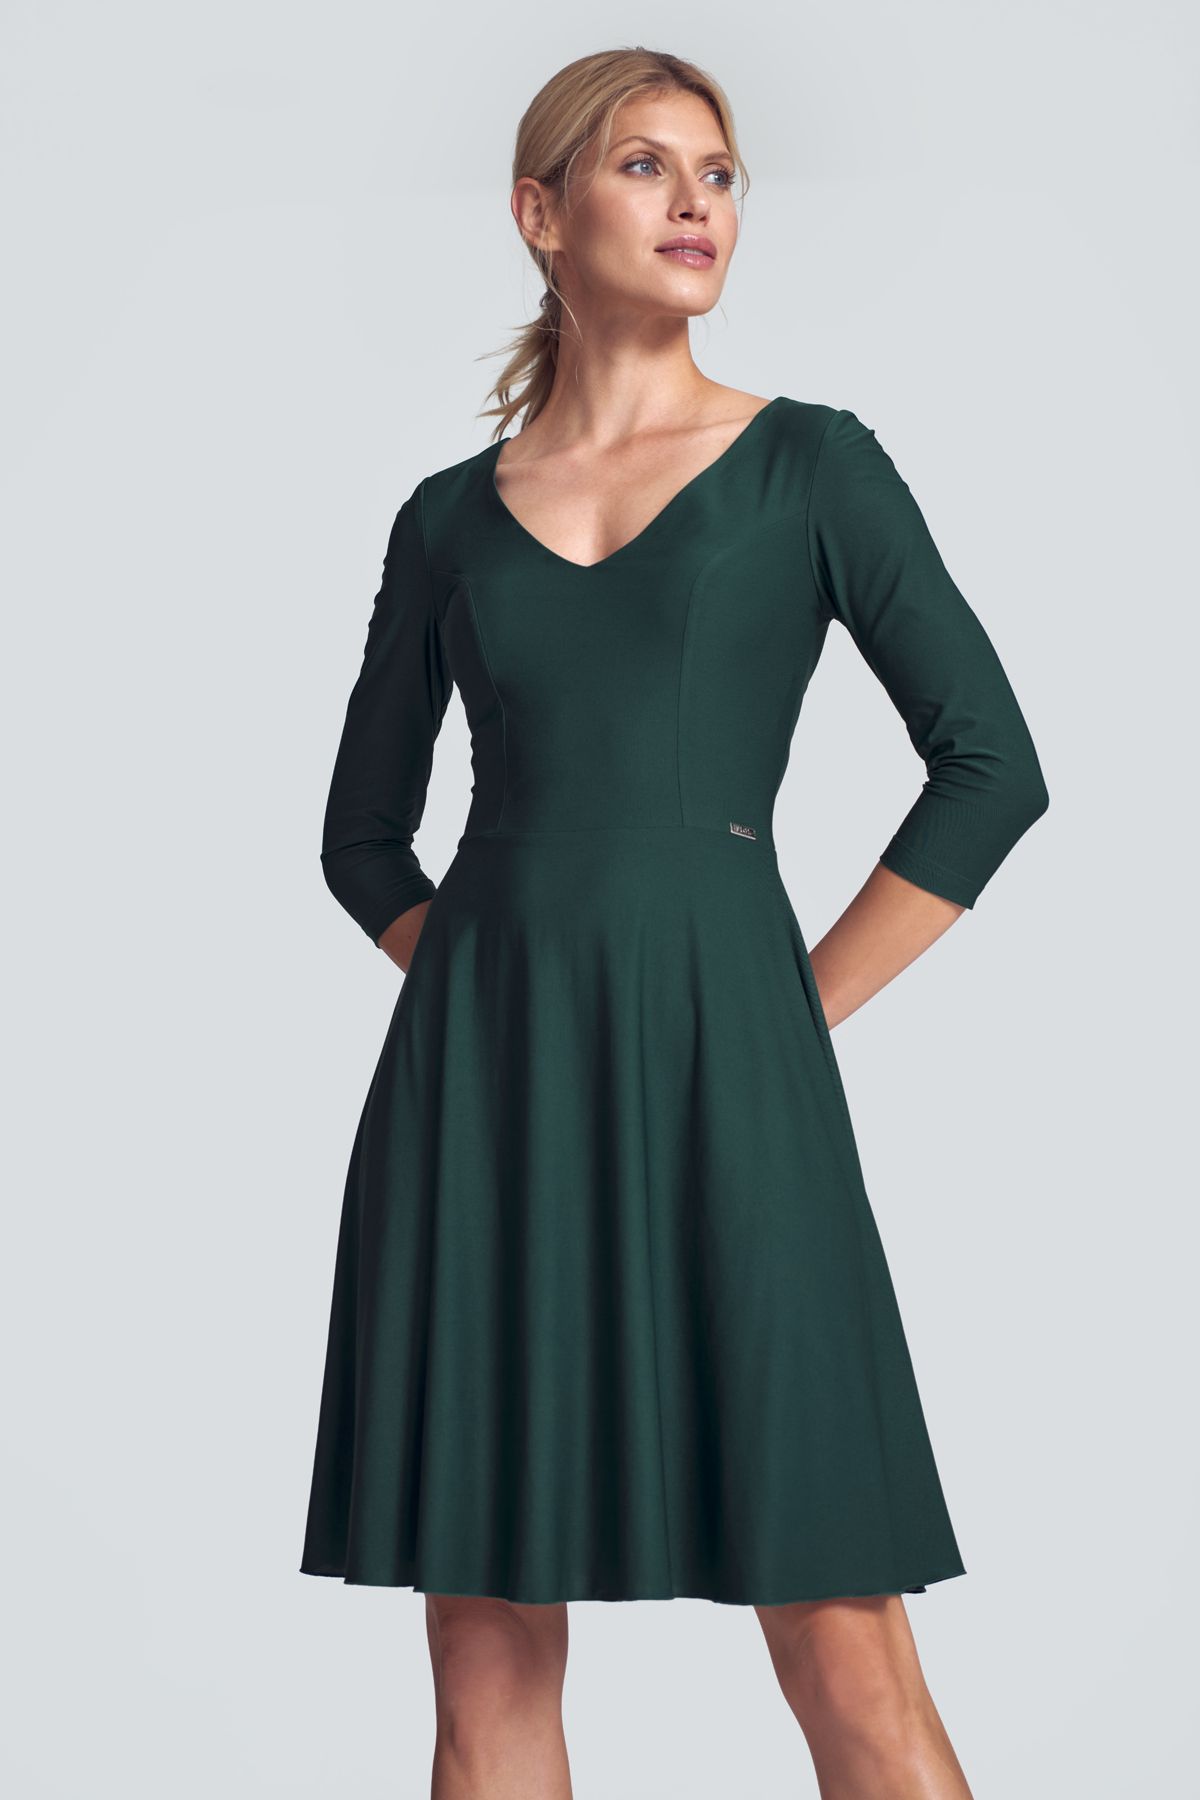 Green cocktail midi dress with a V-neck, ¾ sleeve, pleats at the bust, sewn at the waist, flared hem. Fastened at the back with a covered zipp.